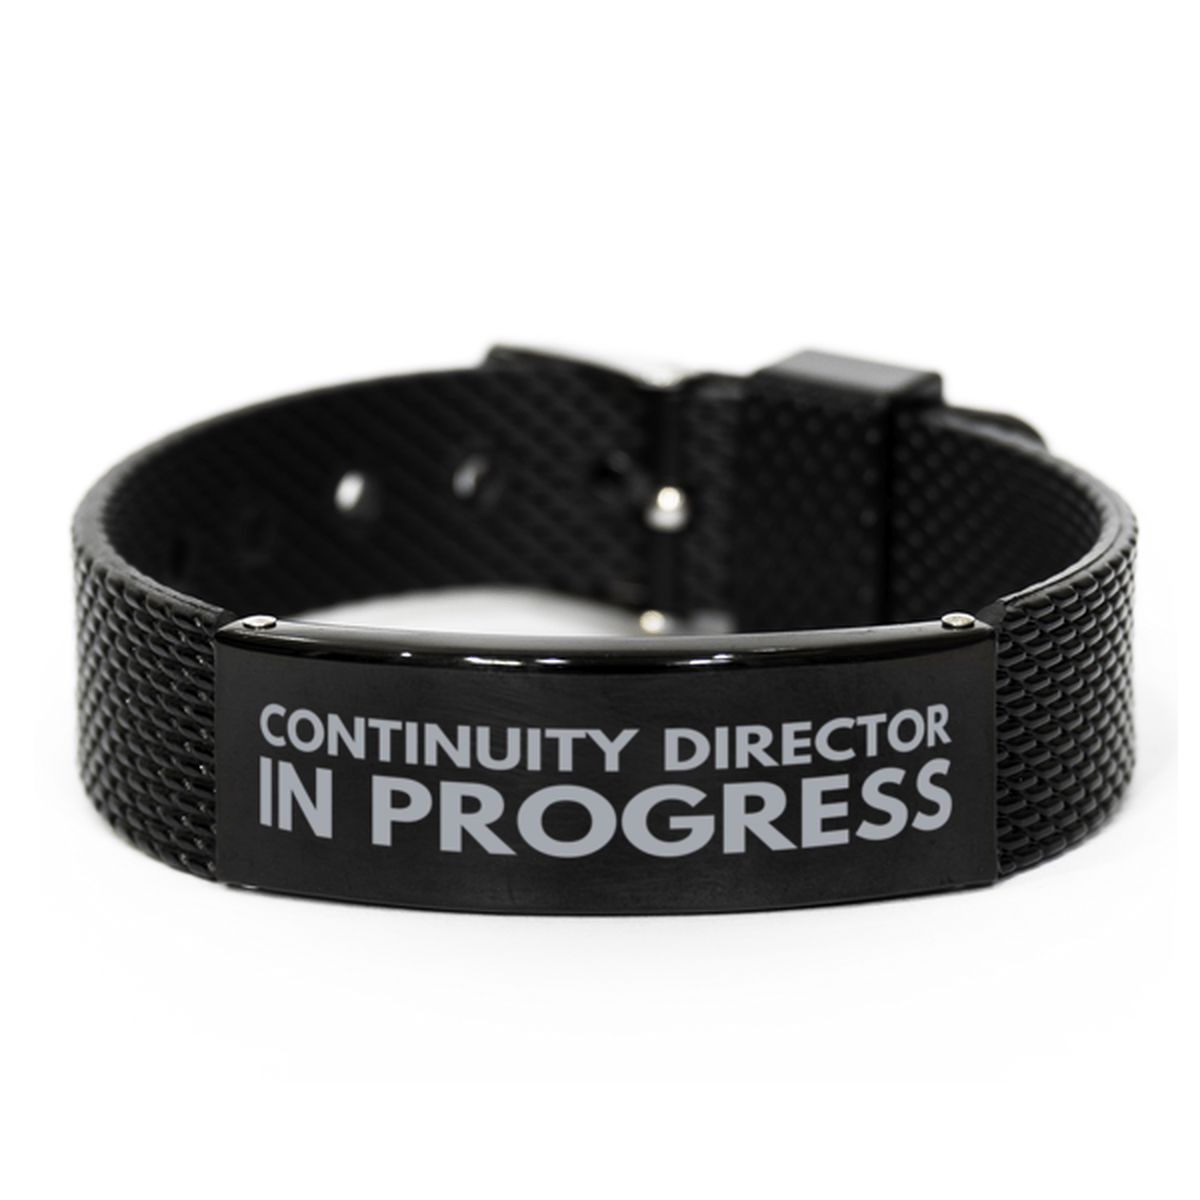 Inspirational Continuity Director Black Shark Mesh Bracelet, Continuity Director In Progress, Best Graduation Gifts for Students